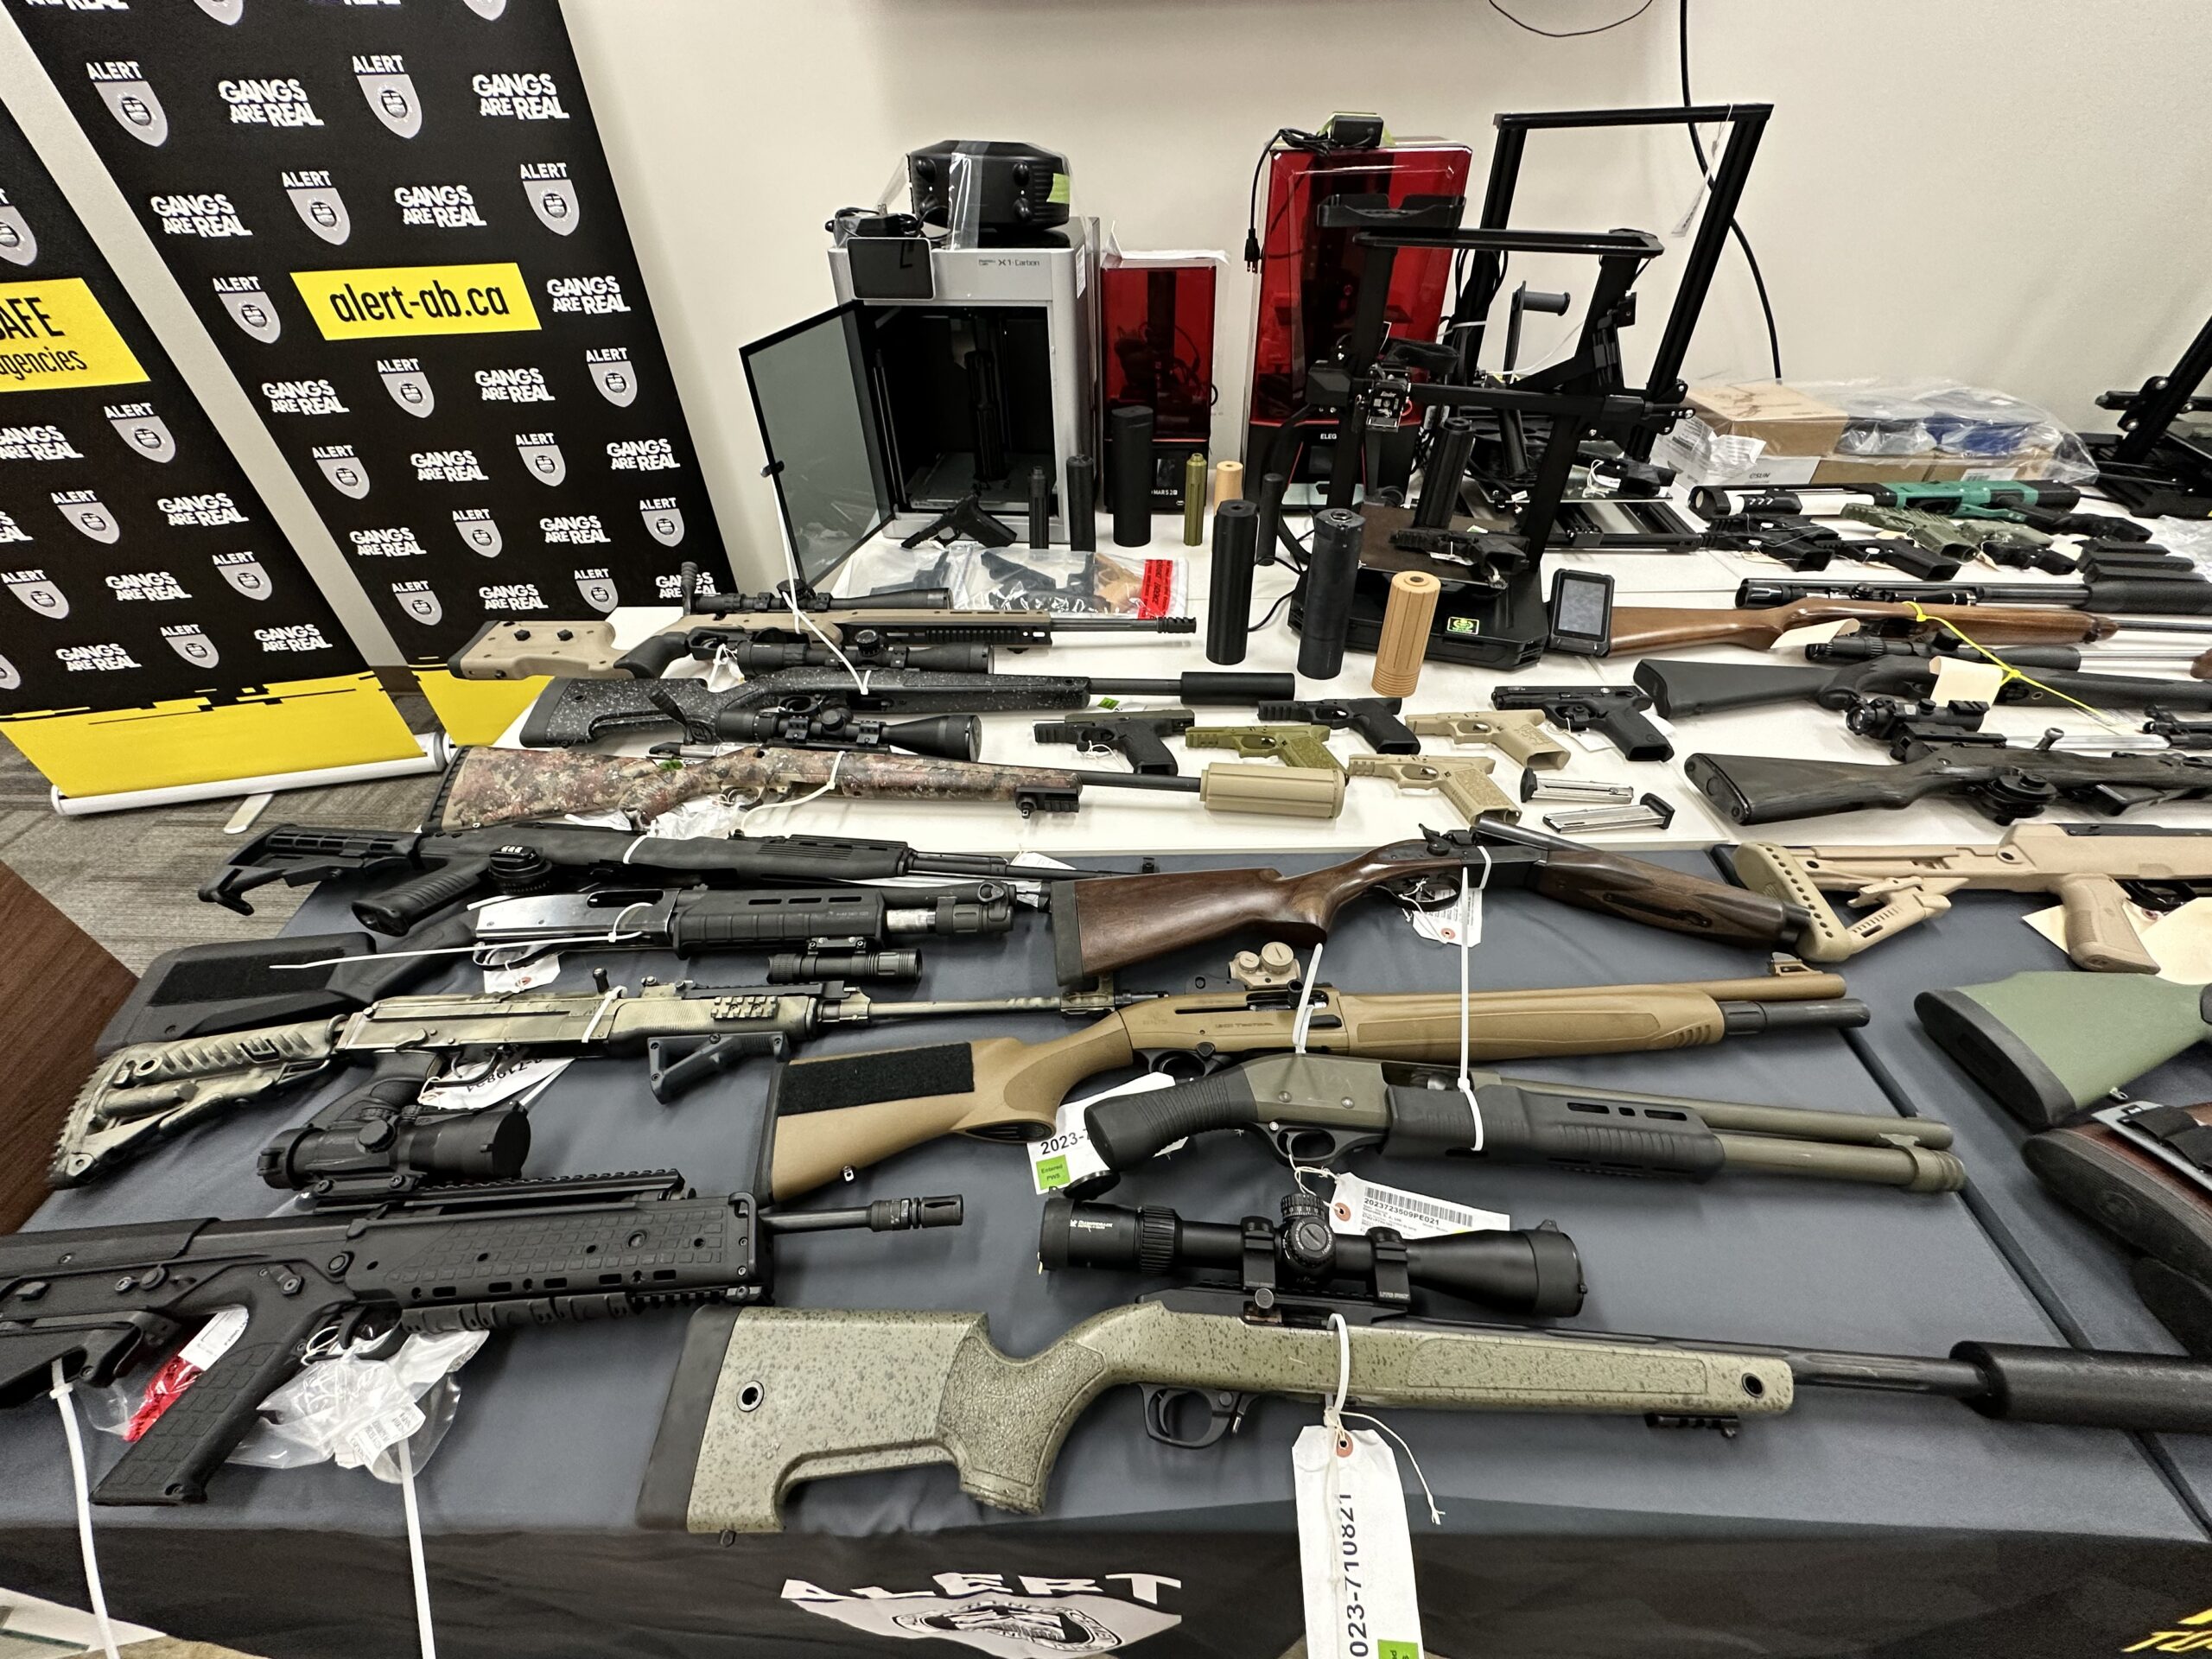 3D-printed firearms, handguns, and rifles seized from Innisfail and Penhold, Alberta.